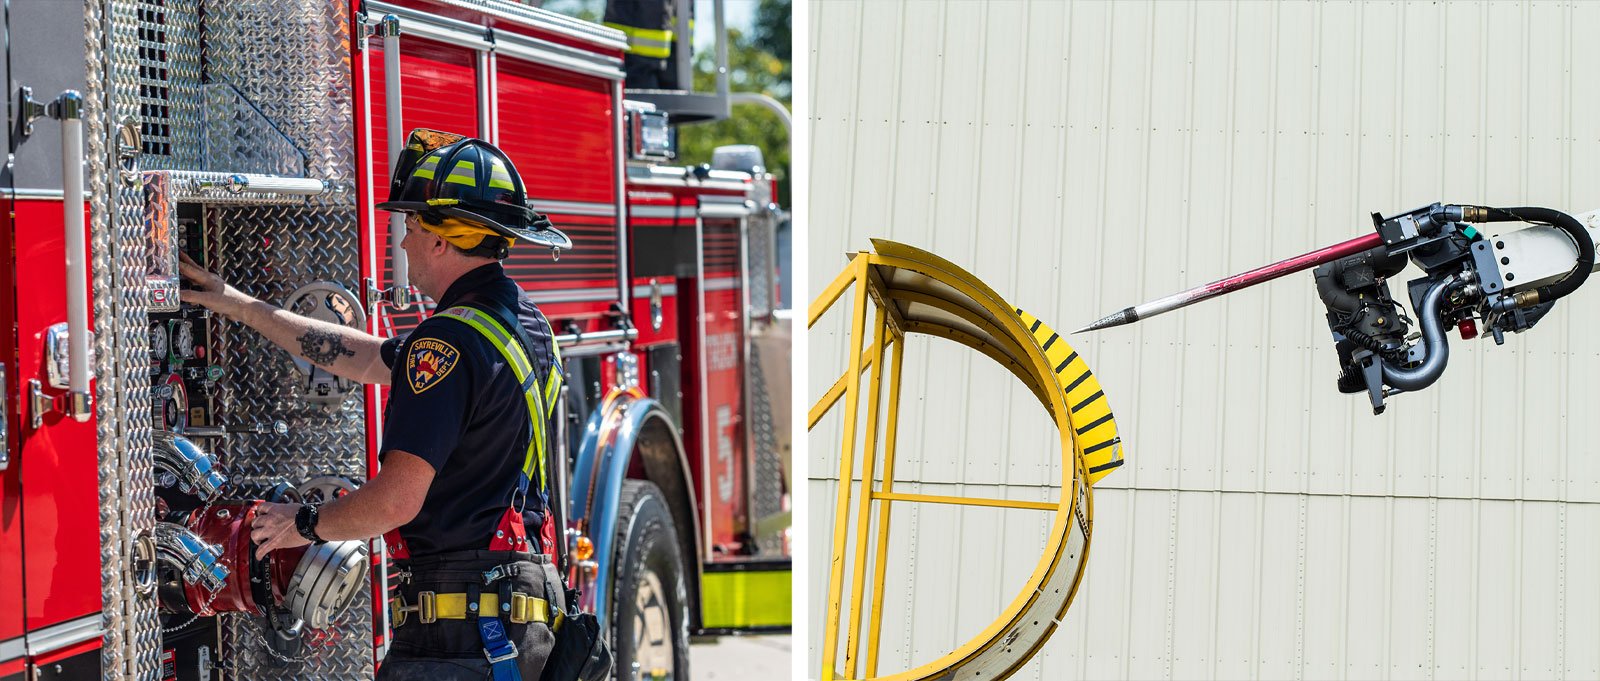 A side-by-side comparison shows a firefighter at the pump panel of a municipal fire truck next to a high reach extendable turret demonstrating how it approaches an airplane shell.